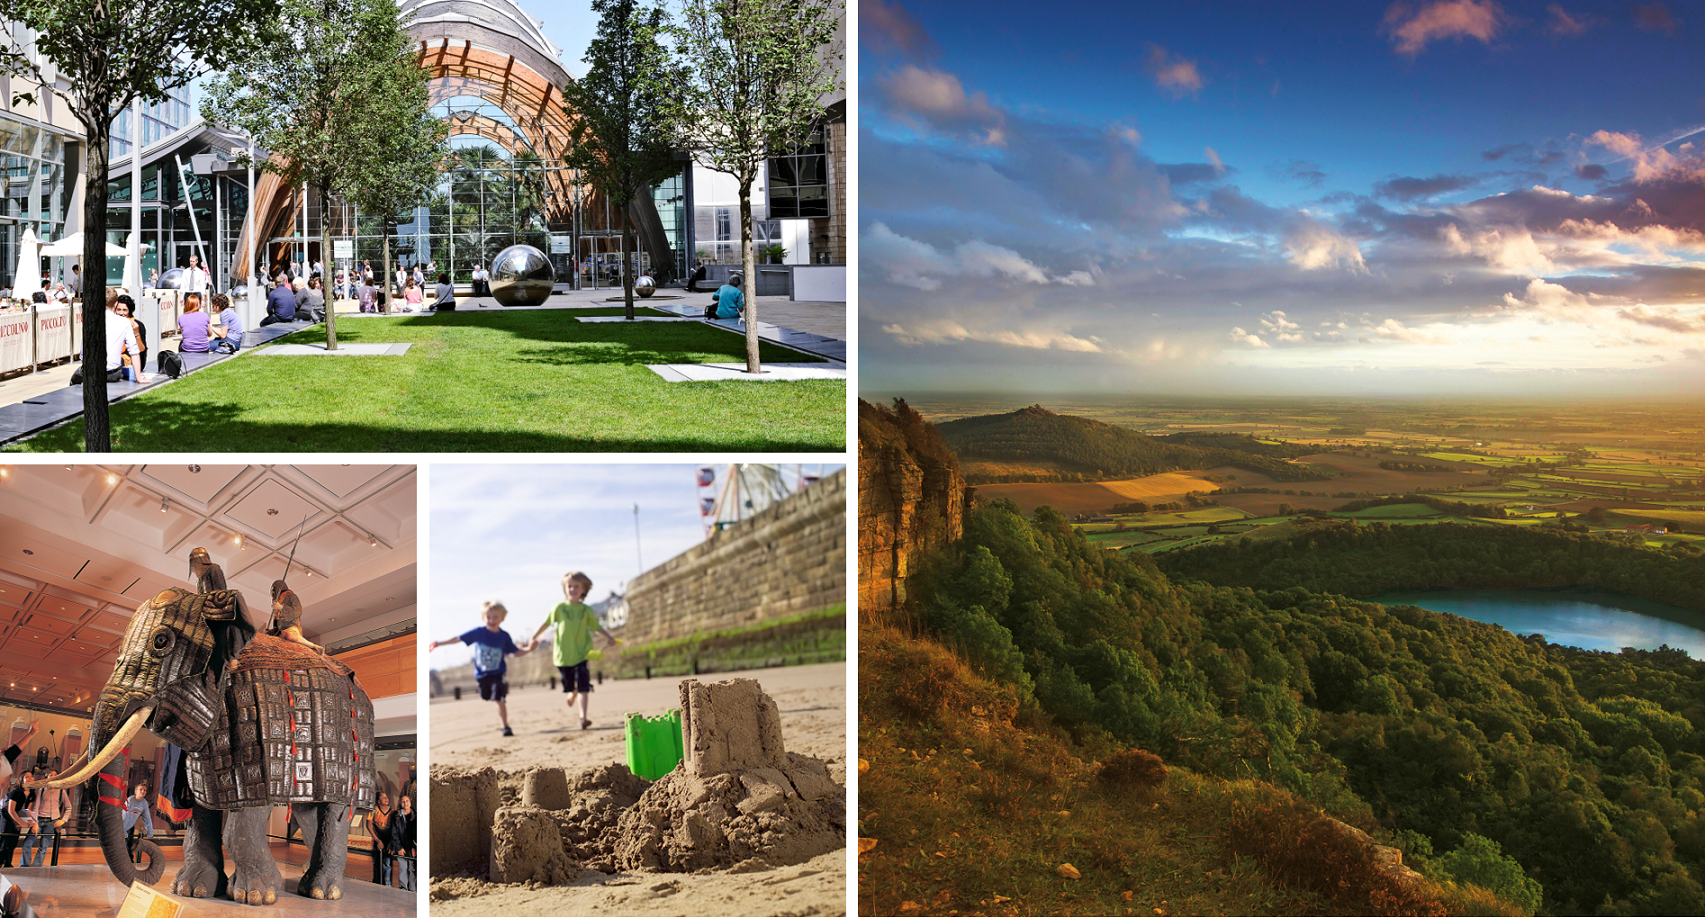 Shaping the future of tourism in Yorkshire